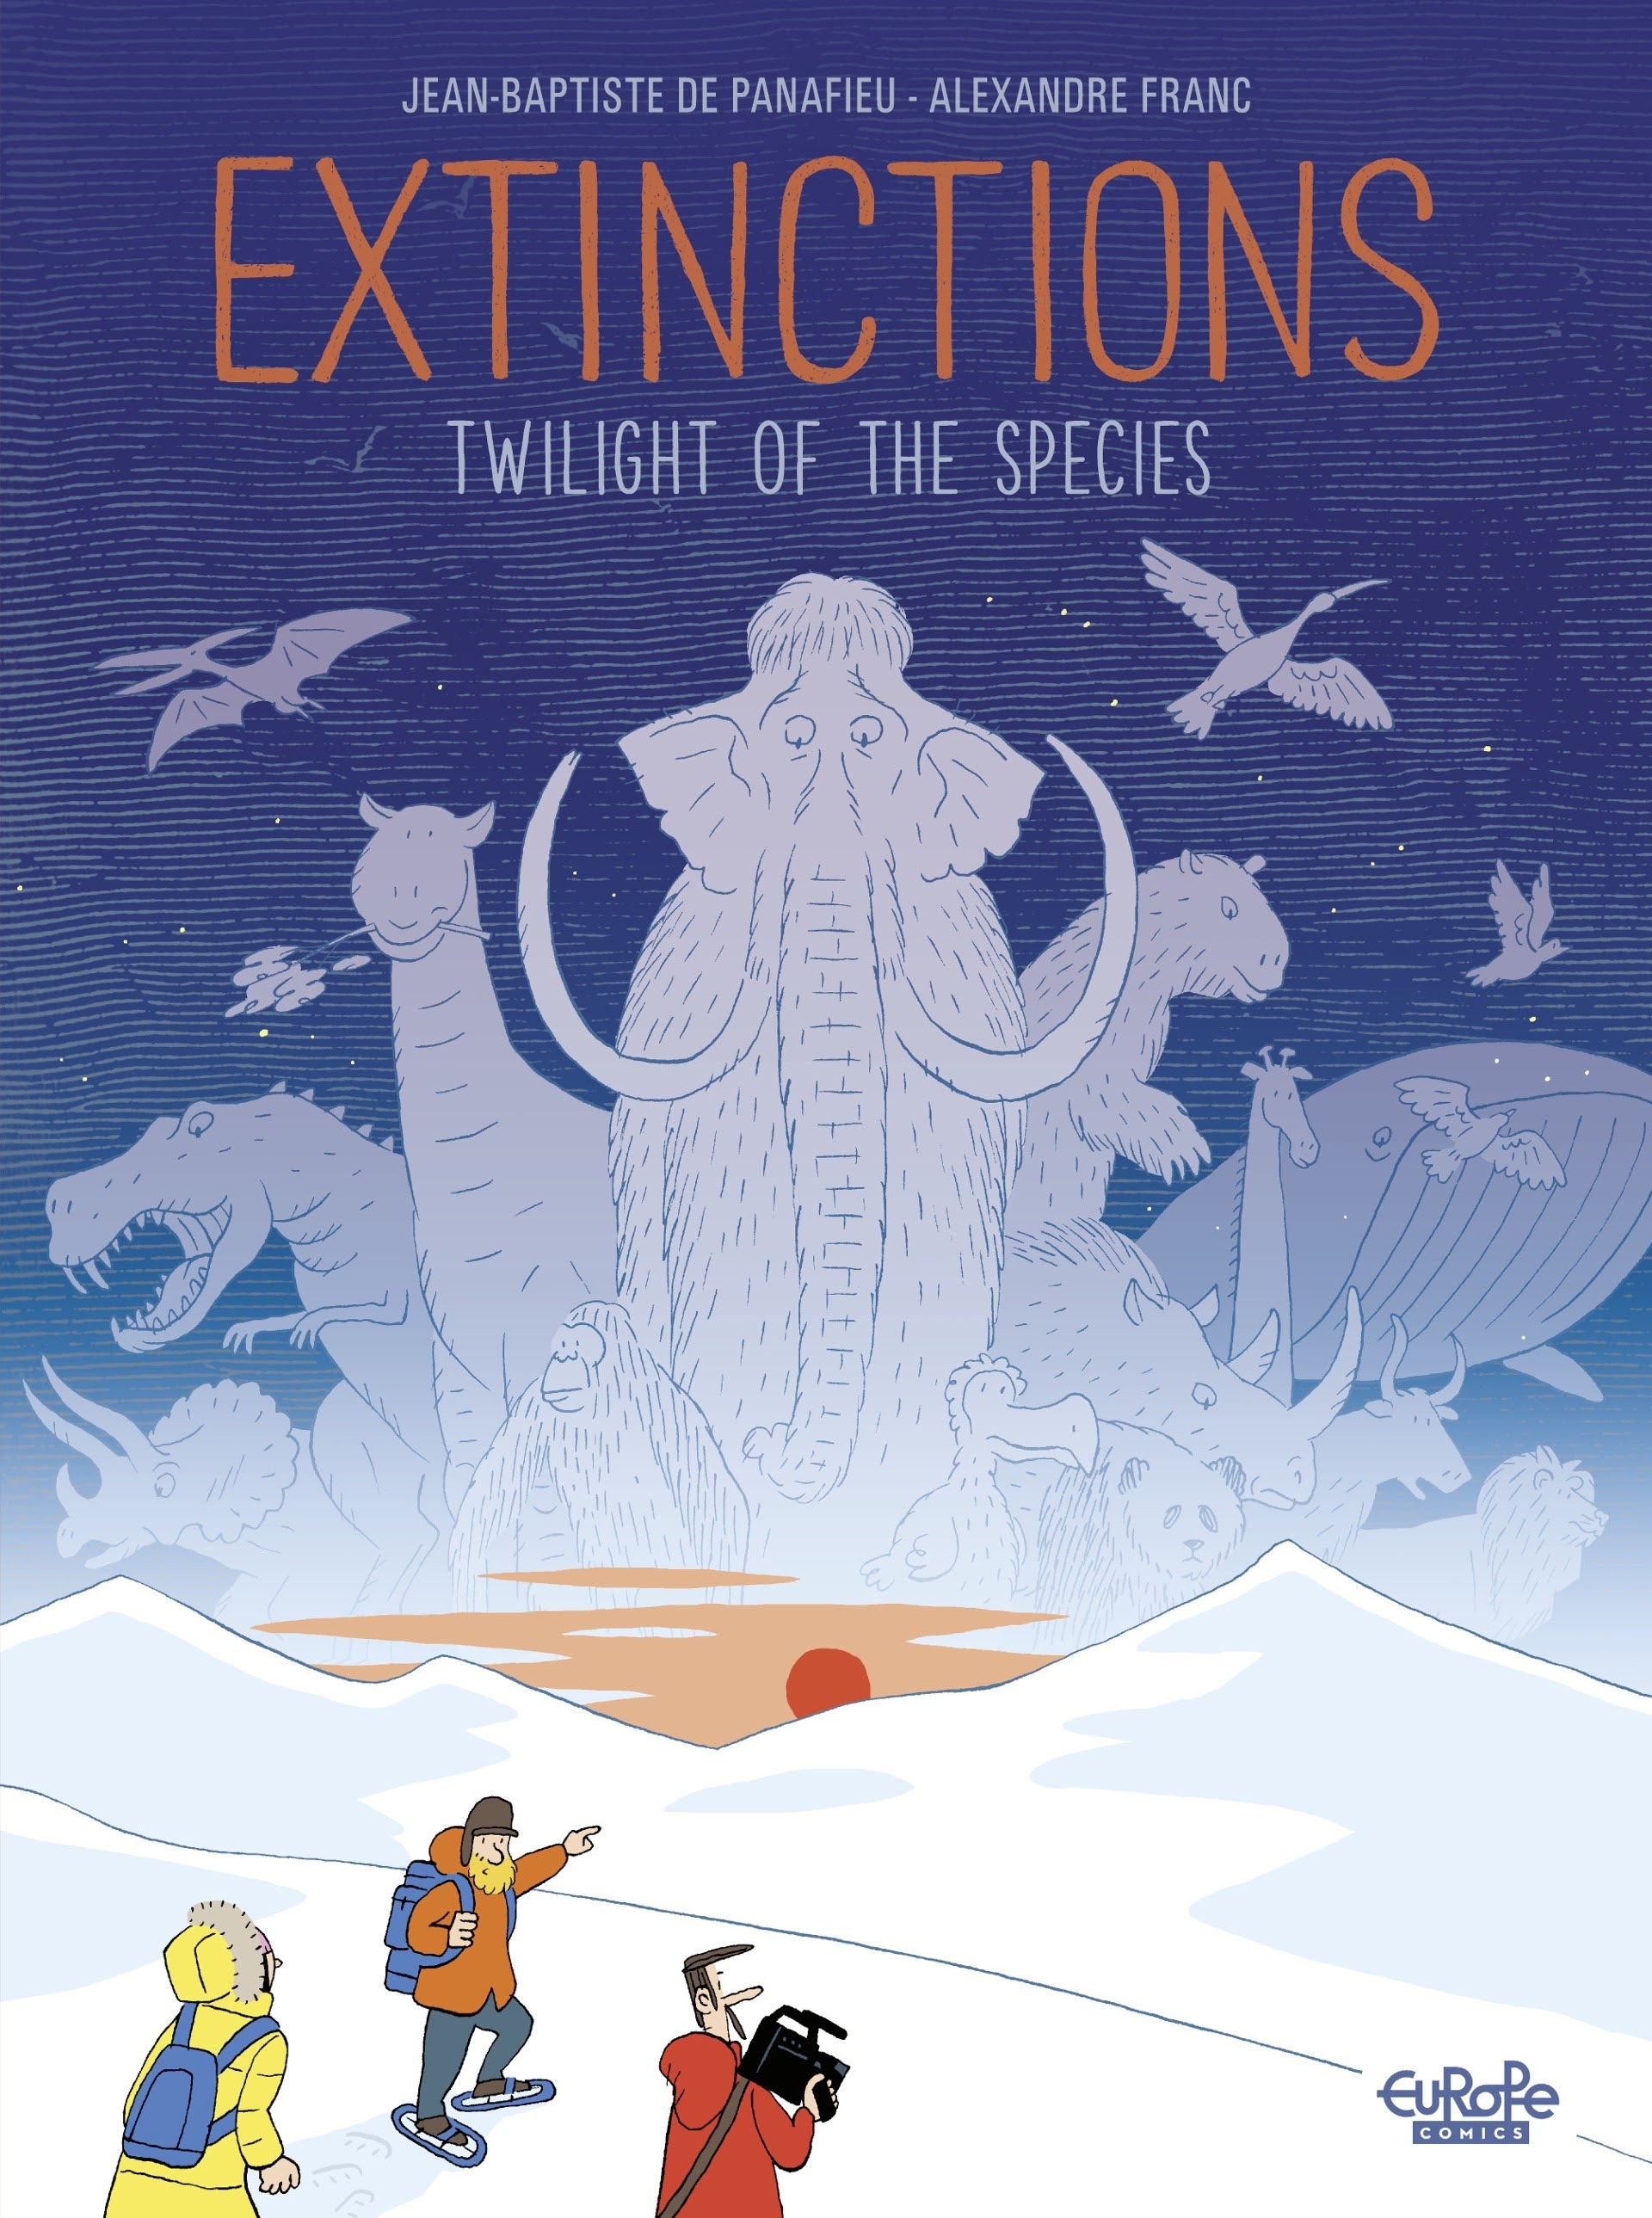 Read online Extinctions: Twilight of the Species comic -  Issue # TPB - 1